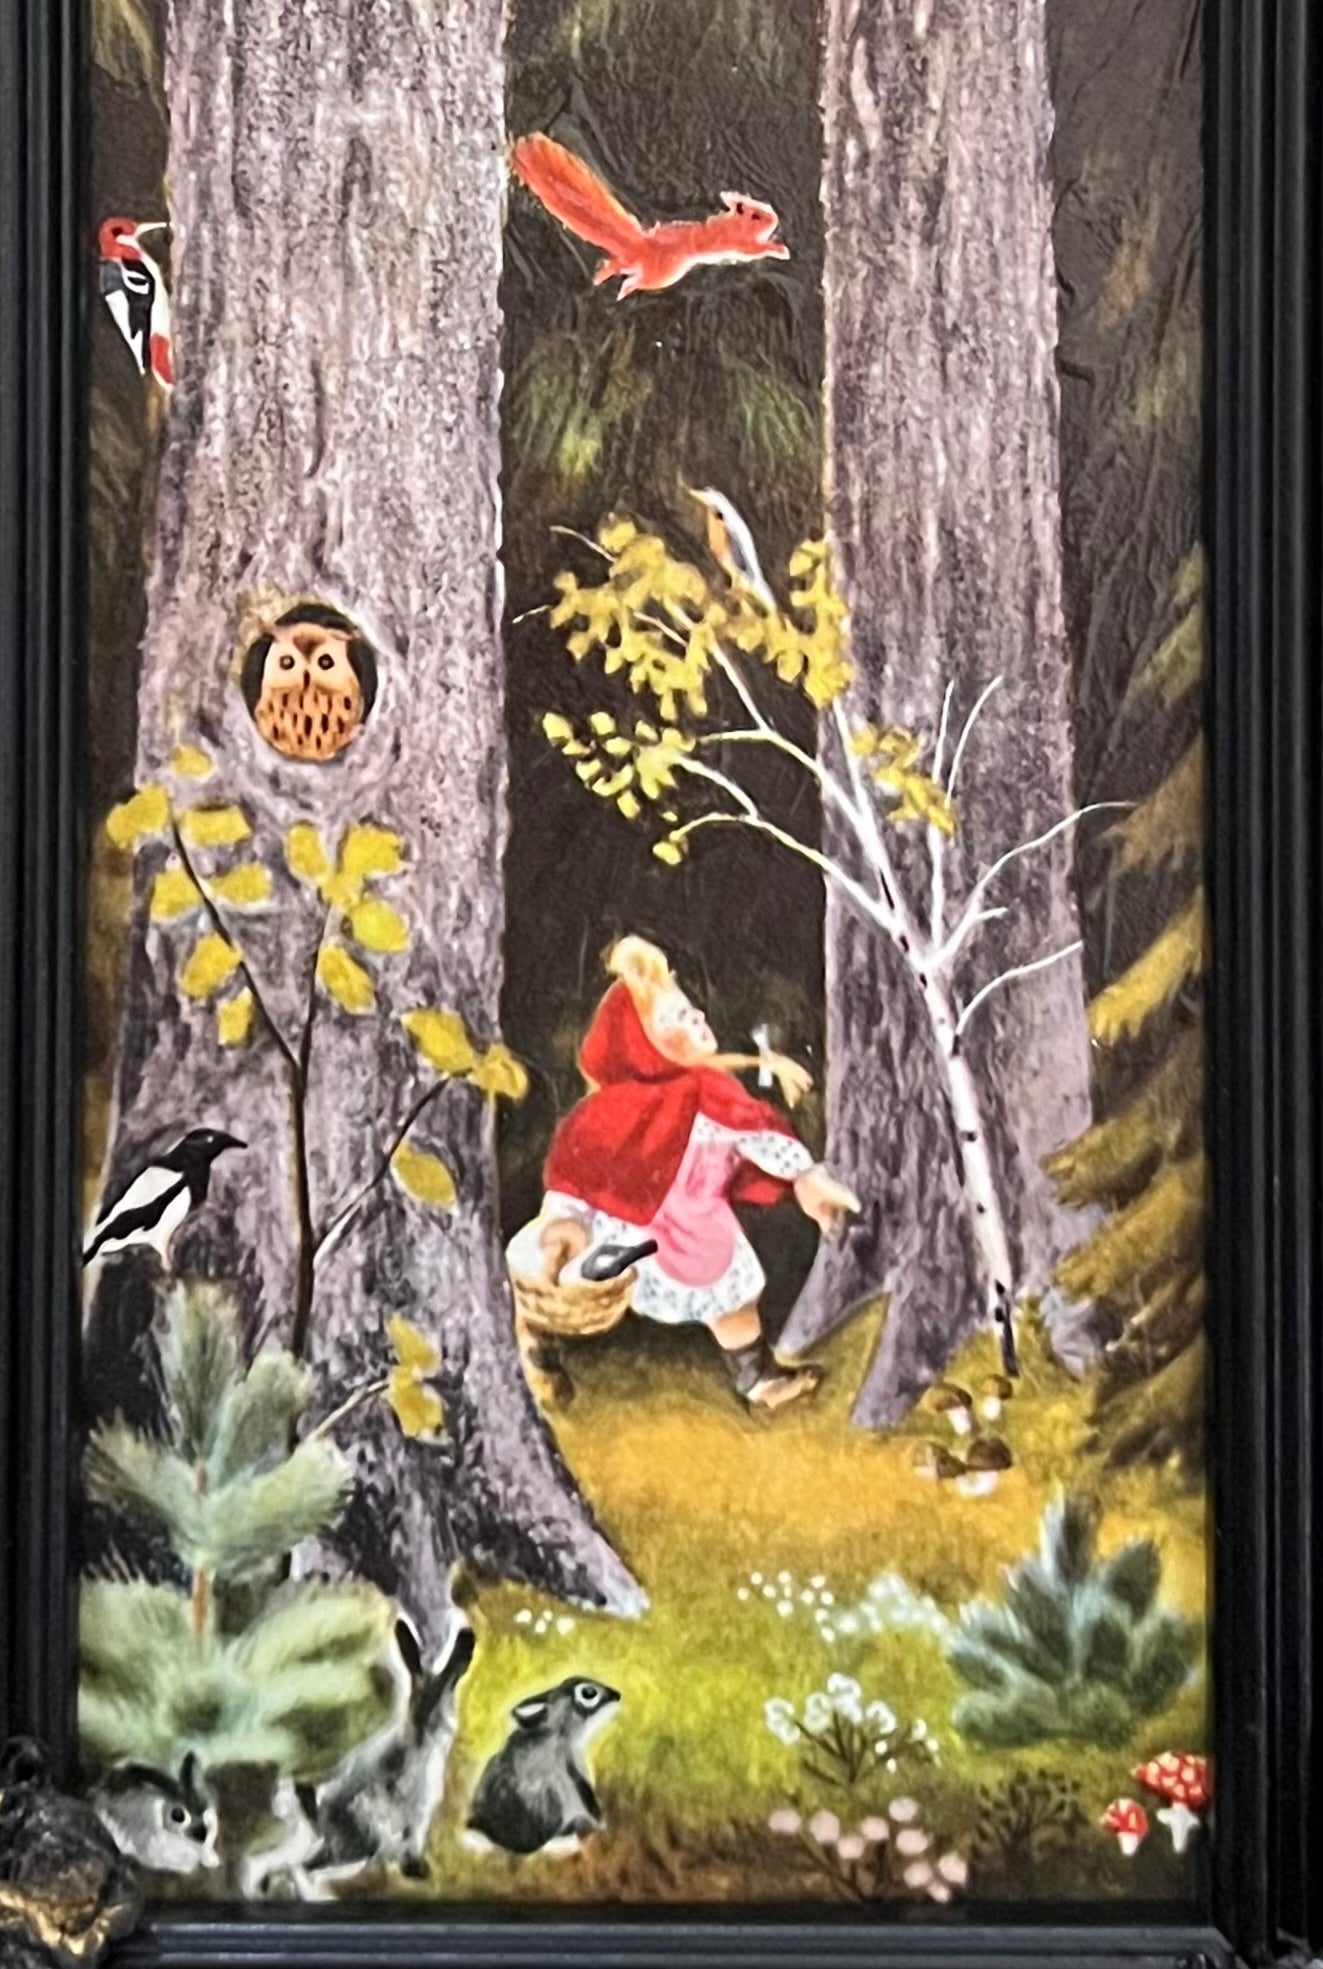 Illustration of Little Red Riding Hood, 7X14 framed page from Vintage Children's Book